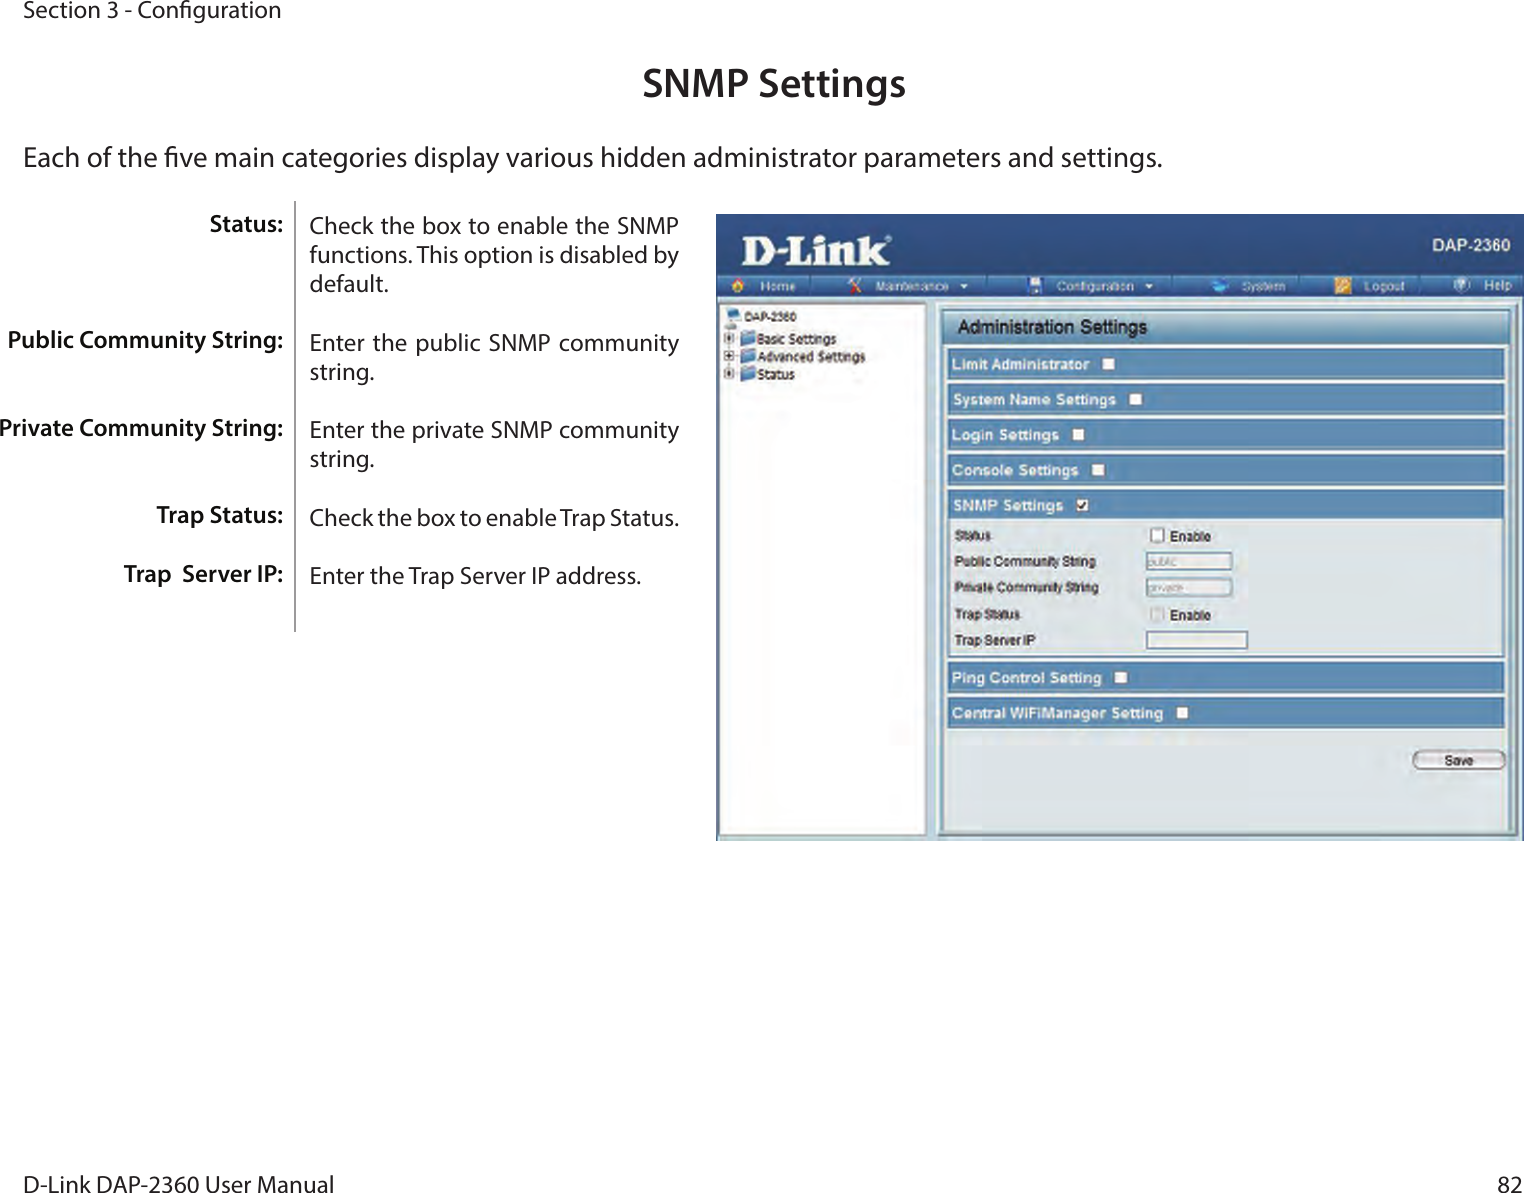 82D-Link DAP-2360 User ManualSection 3 - CongurationSNMP SettingsEach of the ve main categories display various hidden administrator parameters and settings.Check the box to enable the SNMP functions. This option is disabled by default.Enter the public  SNMP community string.Enter the private SNMP community string.Check the box to enable Trap Status.Enter the Trap Server IP address.Status:Public Community String:Private Community String:Trap Status:Trap  Server IP: